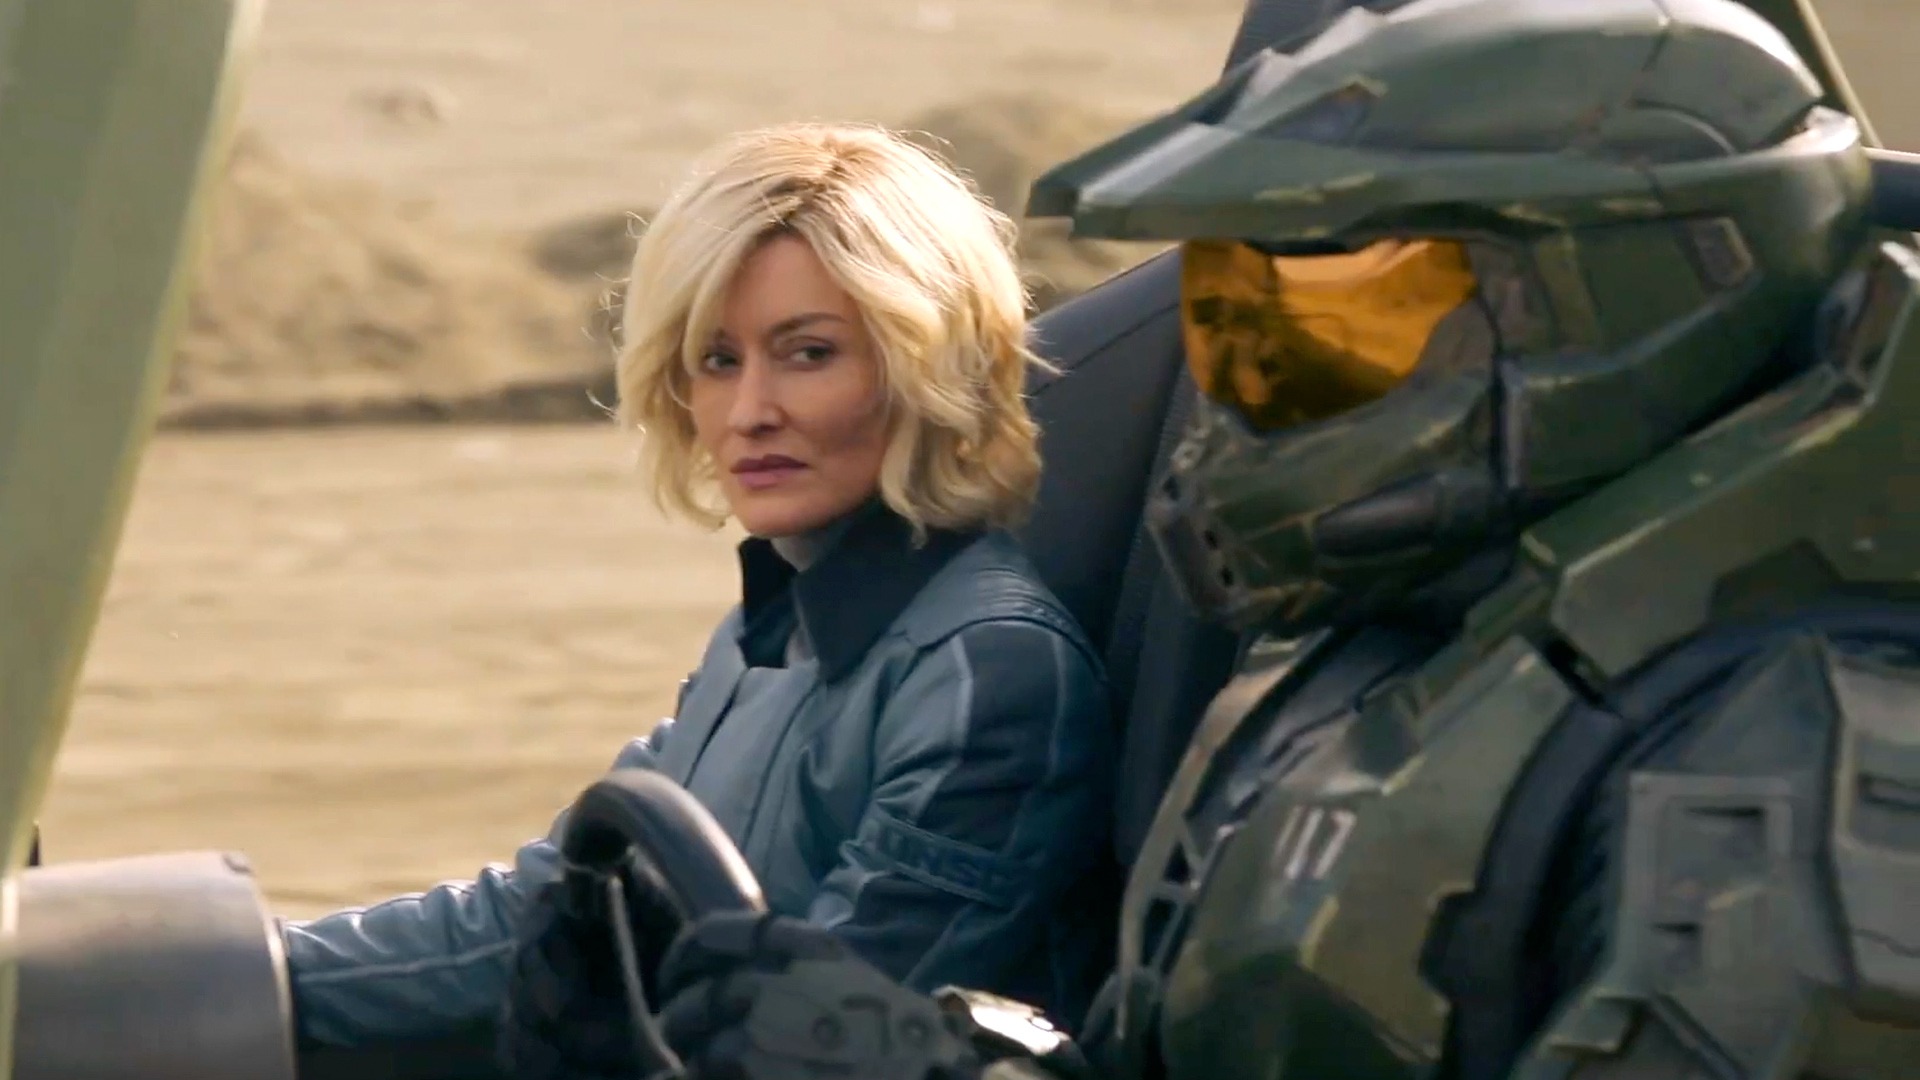 Halo: Paramount+ Releases Trailer and Poster for Drama Series Based on Xbox  Franchise (Watch) - canceled + renewed TV shows, ratings - TV Series Finale